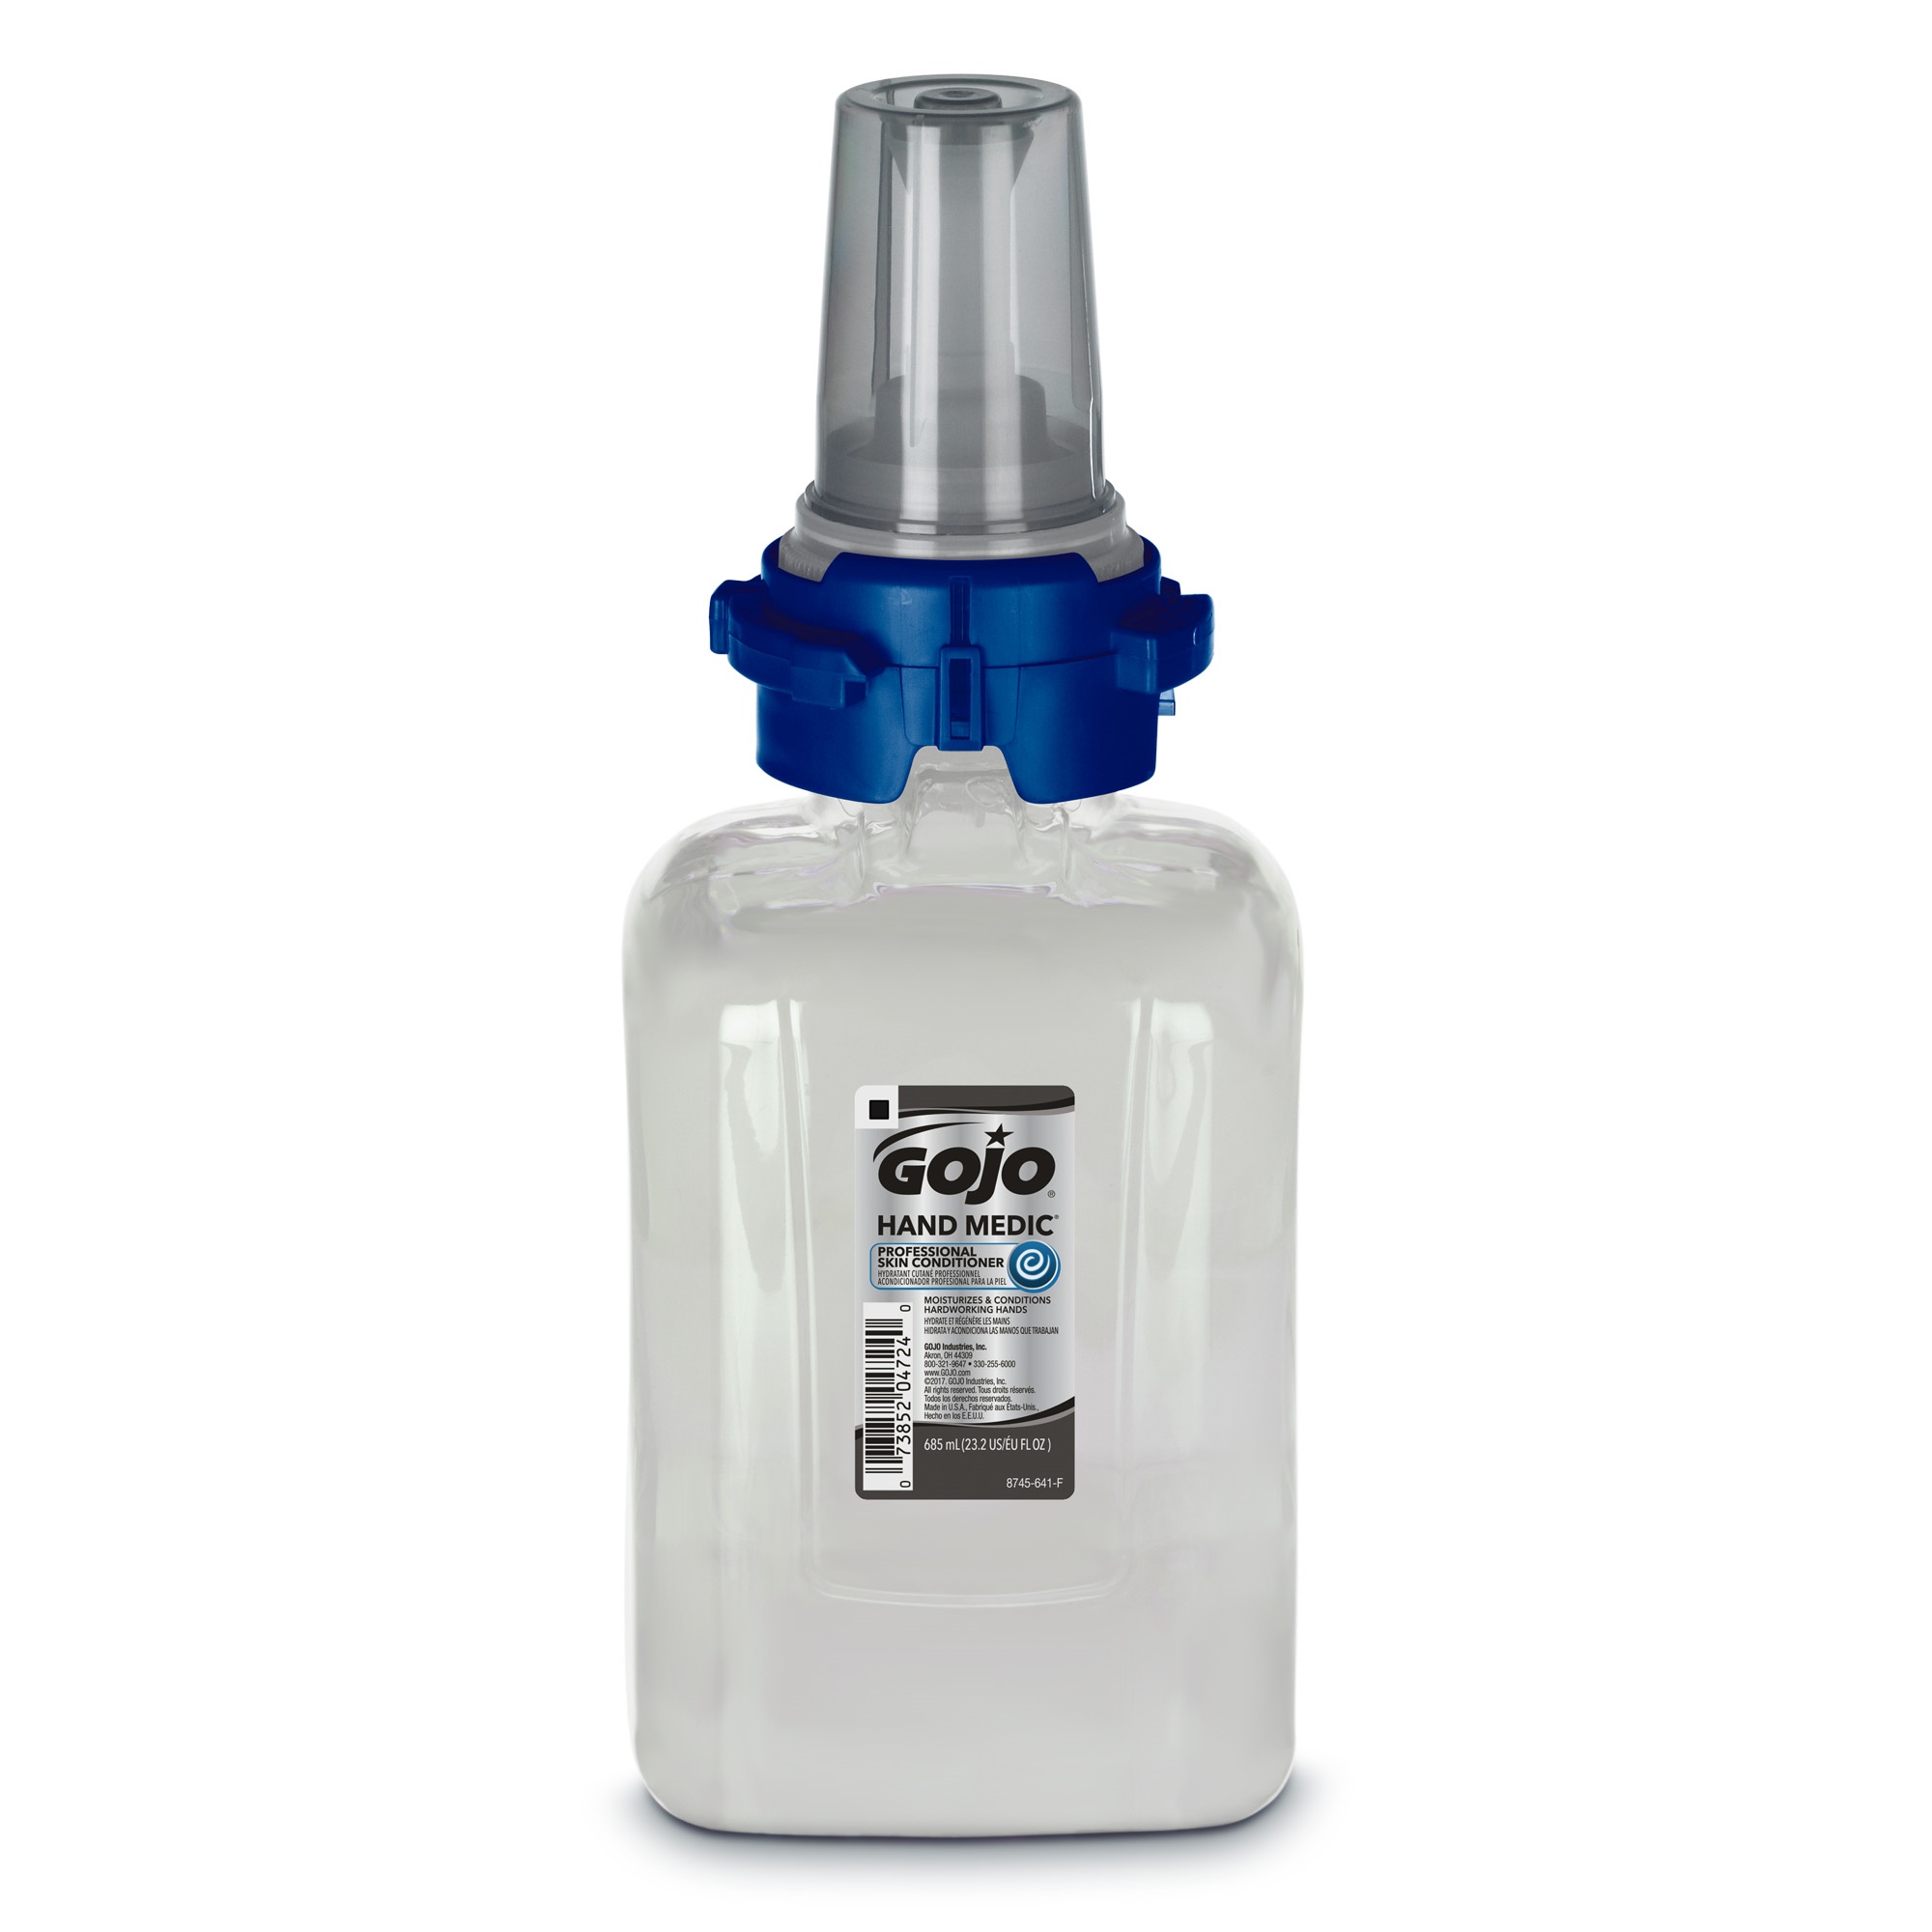 Gojo Hand Medic Professional Skin Condition 685ml (to use with